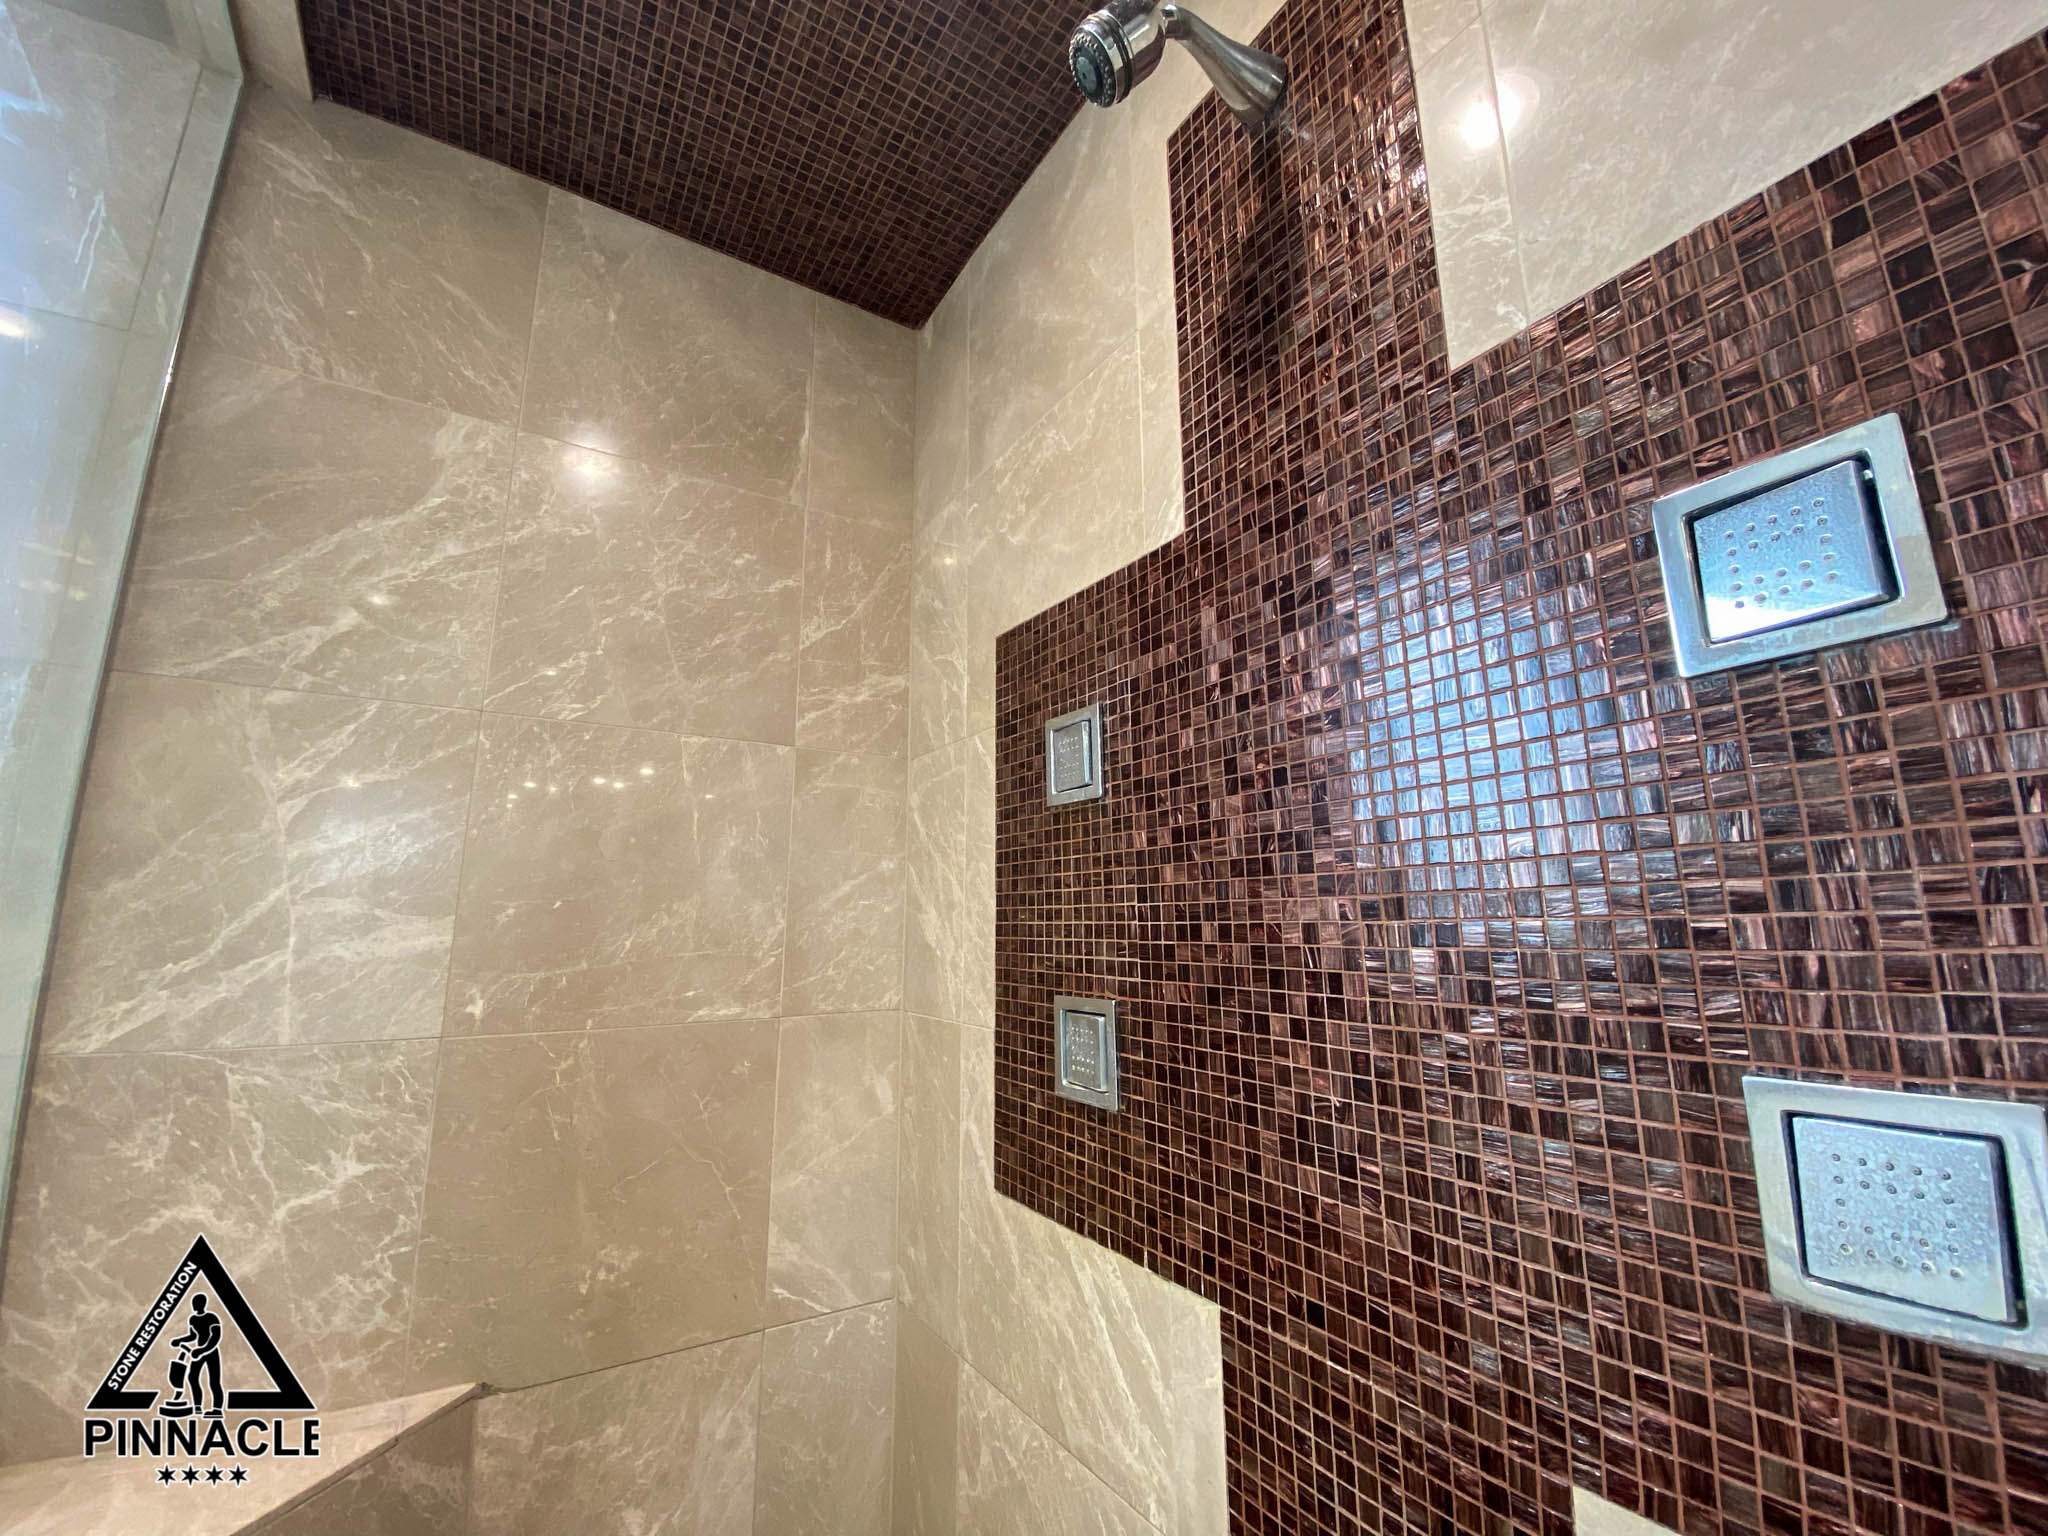 Crema Marfil Marble Shower and Bath Surround Restoration – deep cleaning, buffing, sealing, grout cleaning